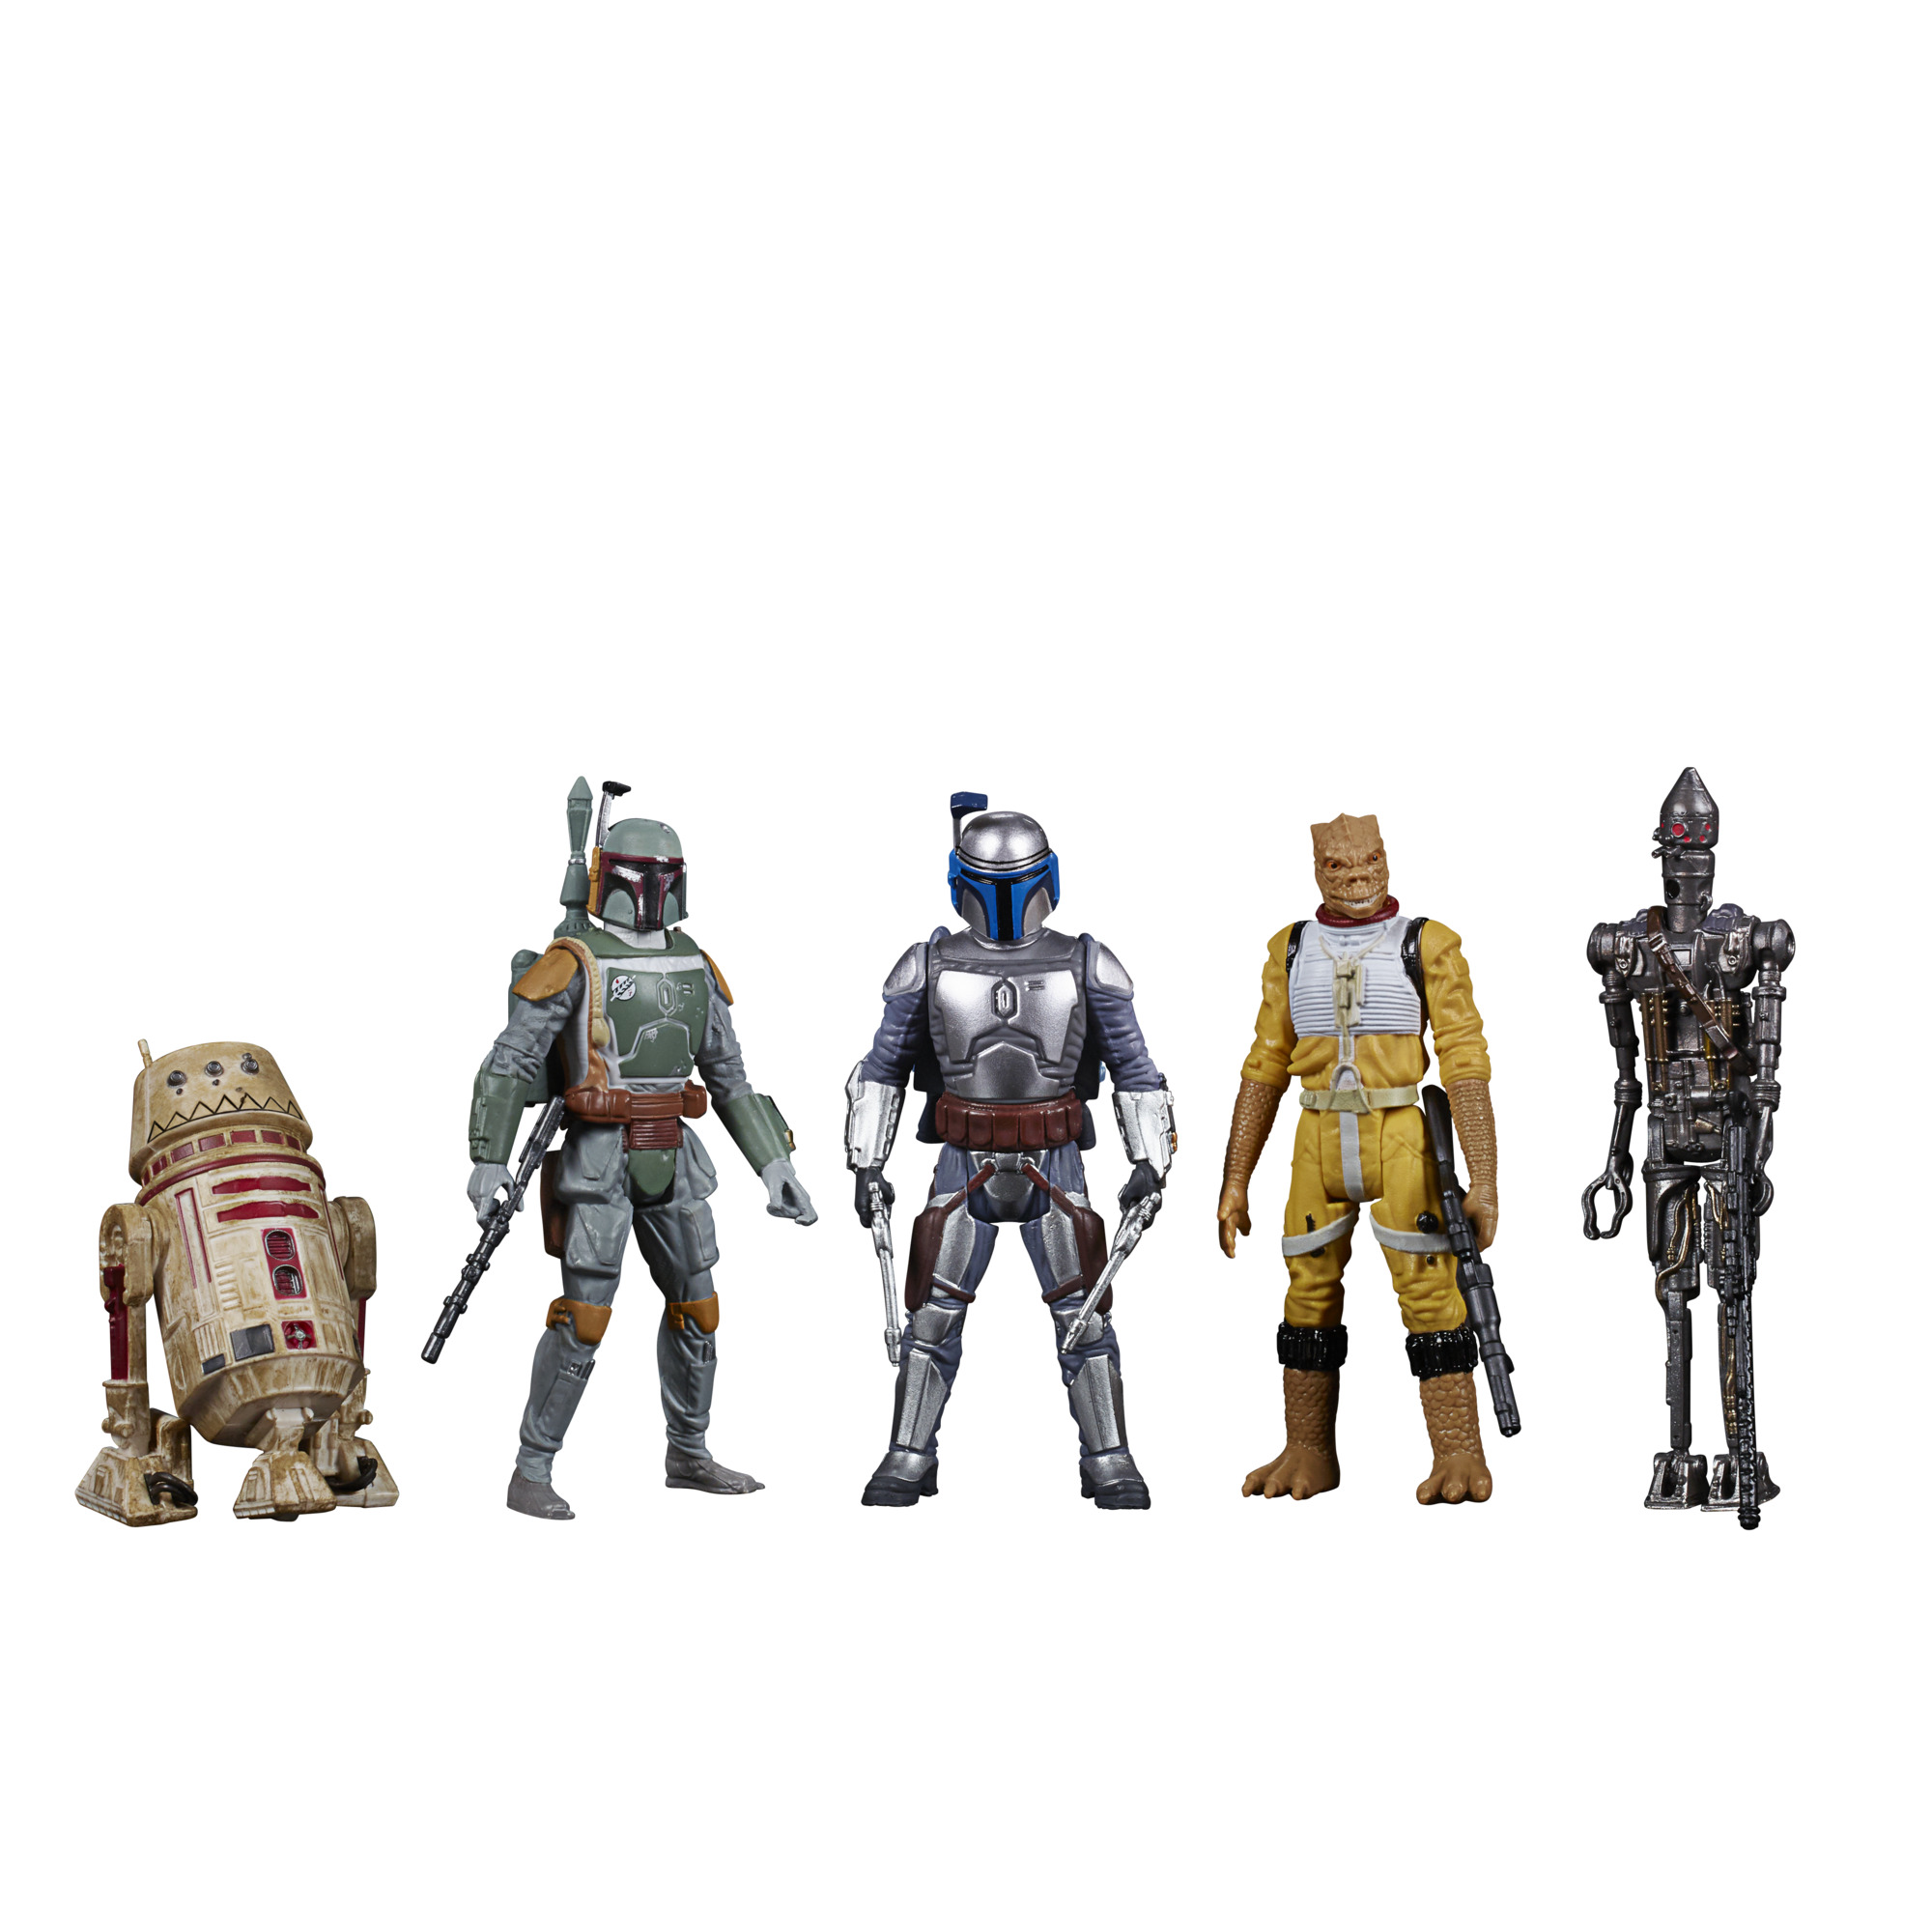 Star Wars Celebrate the Saga Toys Bounty Hunters Action Figure Set, Accessories - image 1 of 7